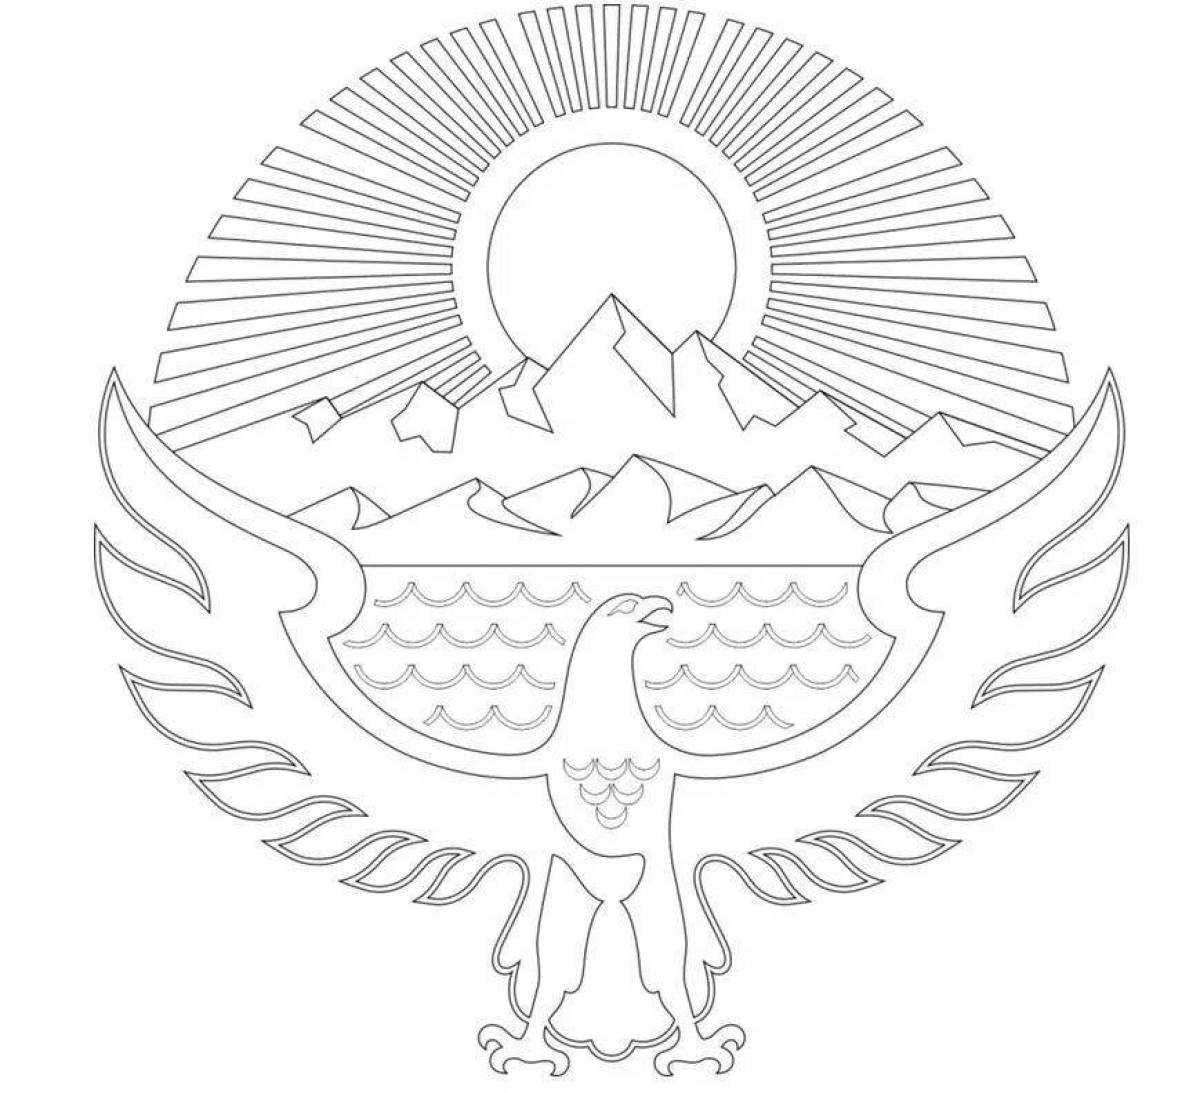 Great coat of arms of belarus coloring page